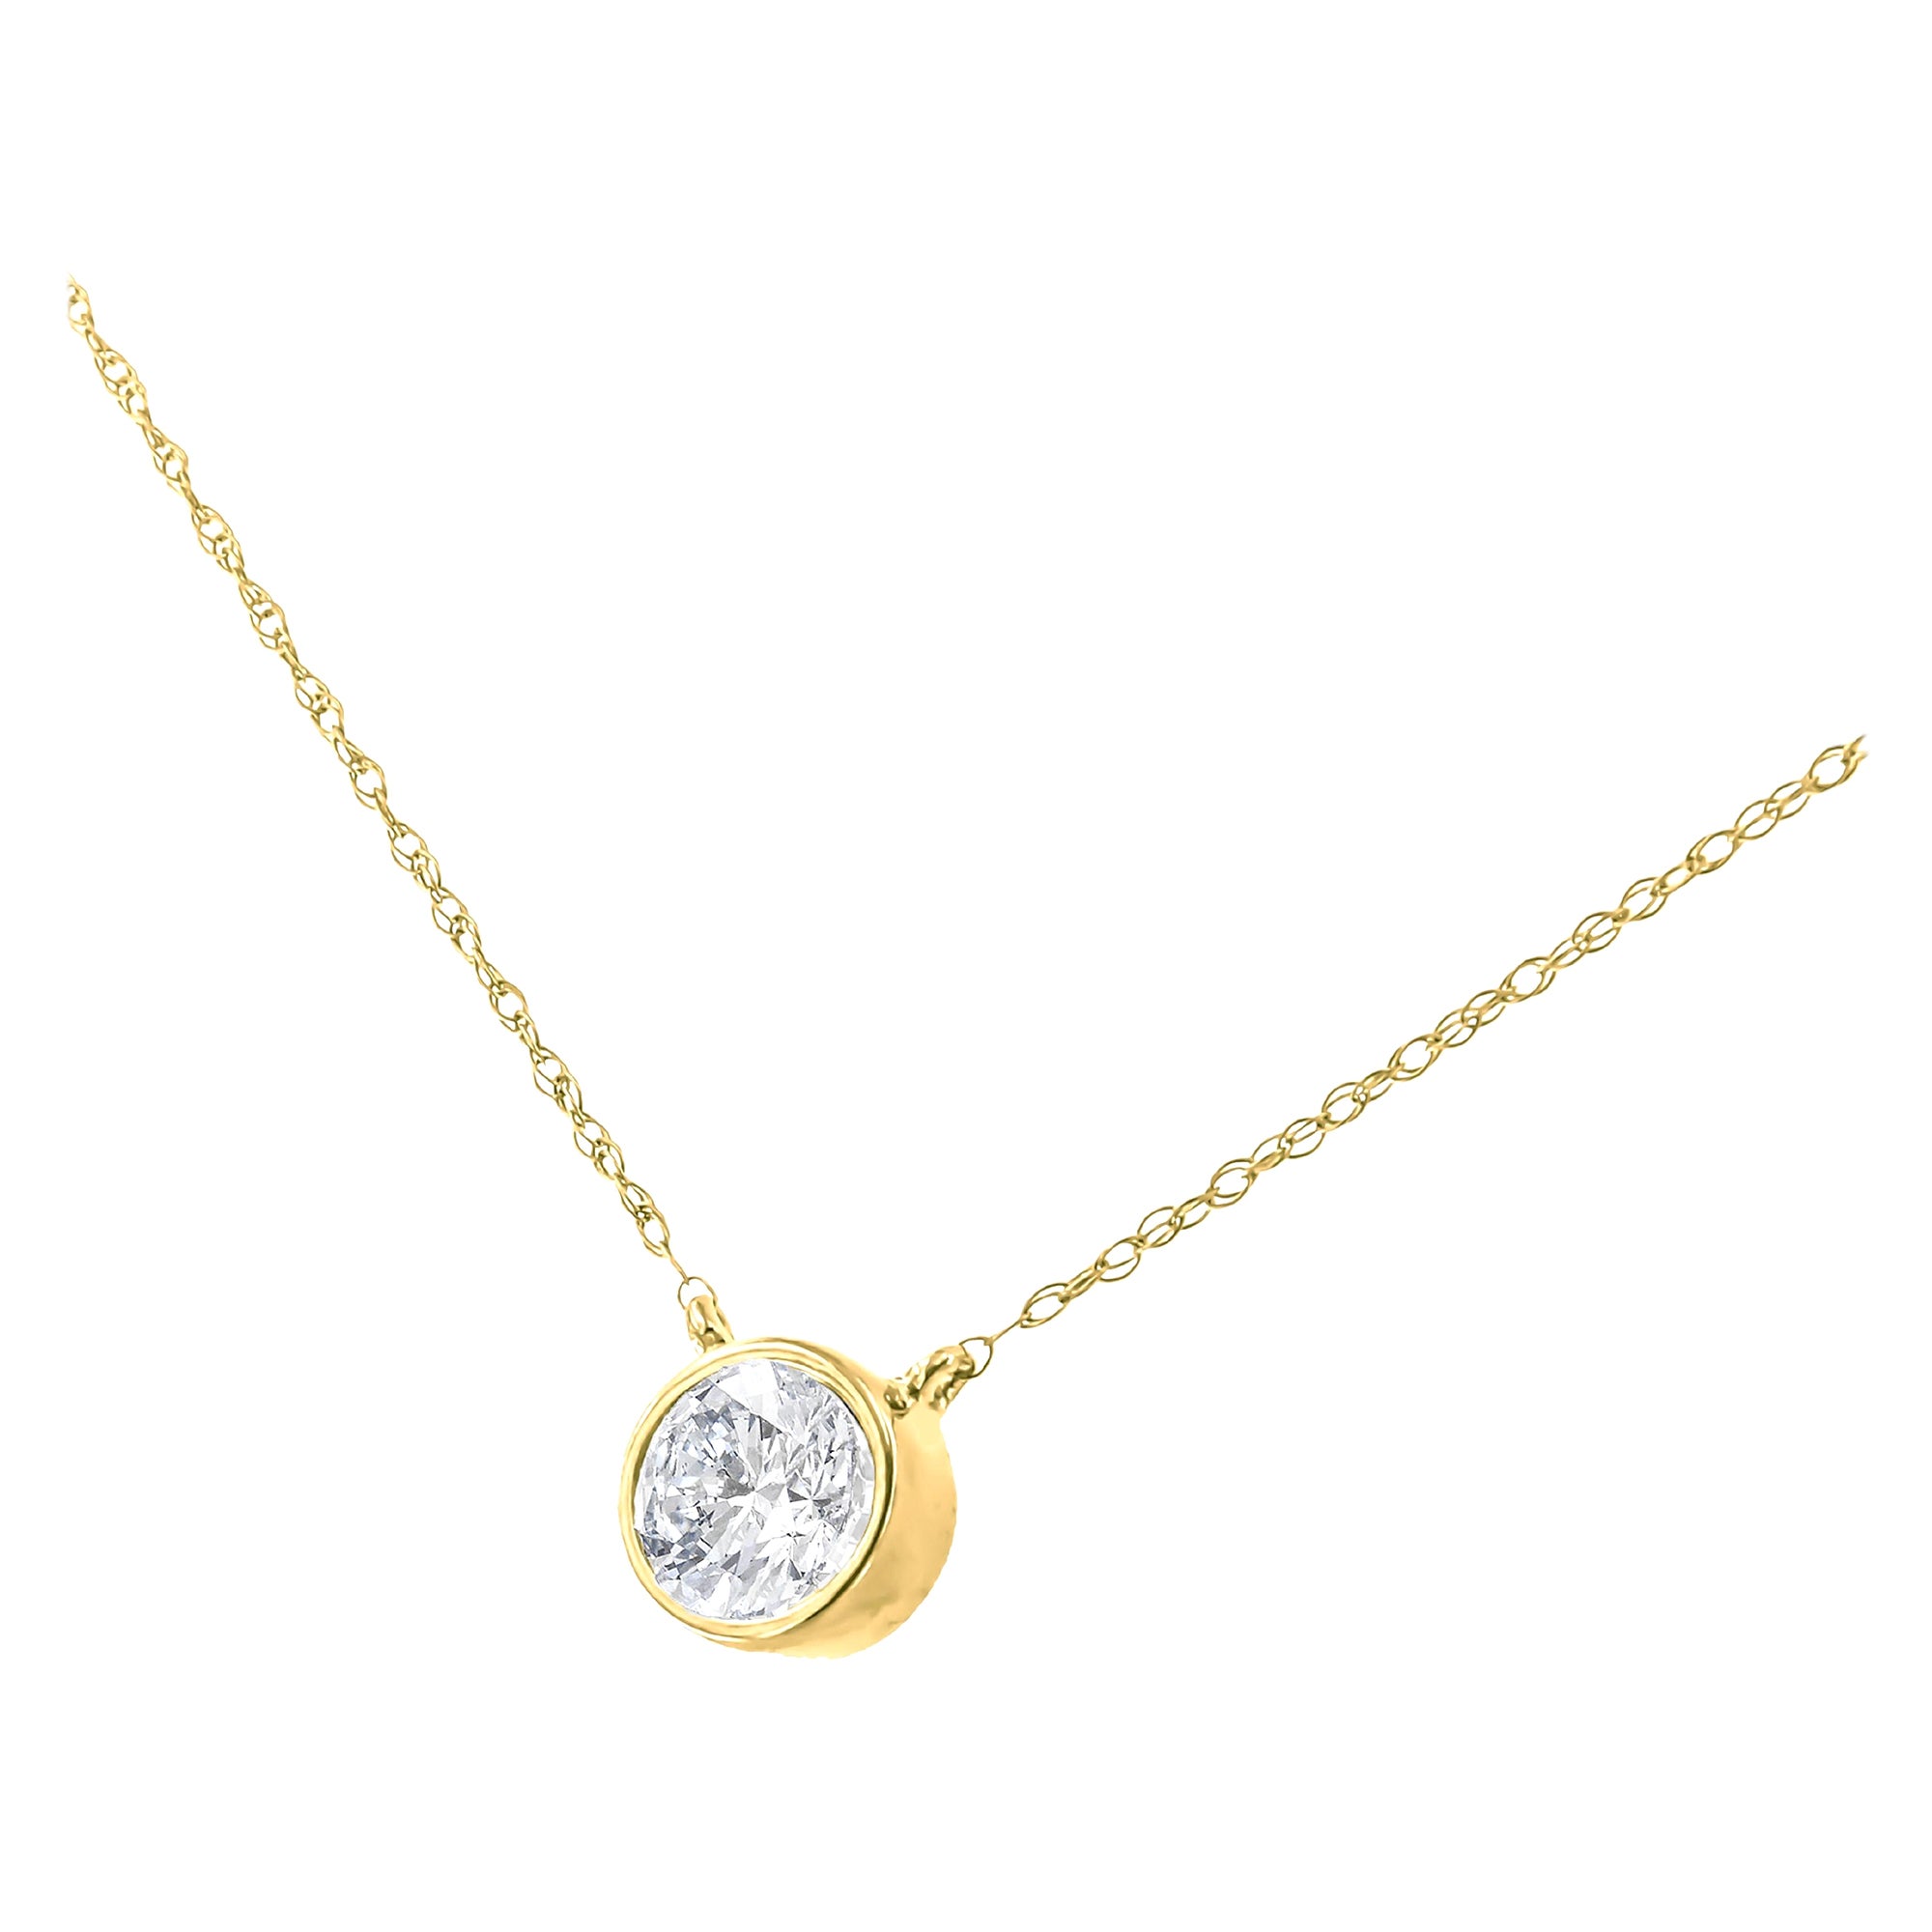 AGS Certified 10k Yellow Gold 1/3 Carat Round Diamond Solitaire Pendant Necklace For Sale